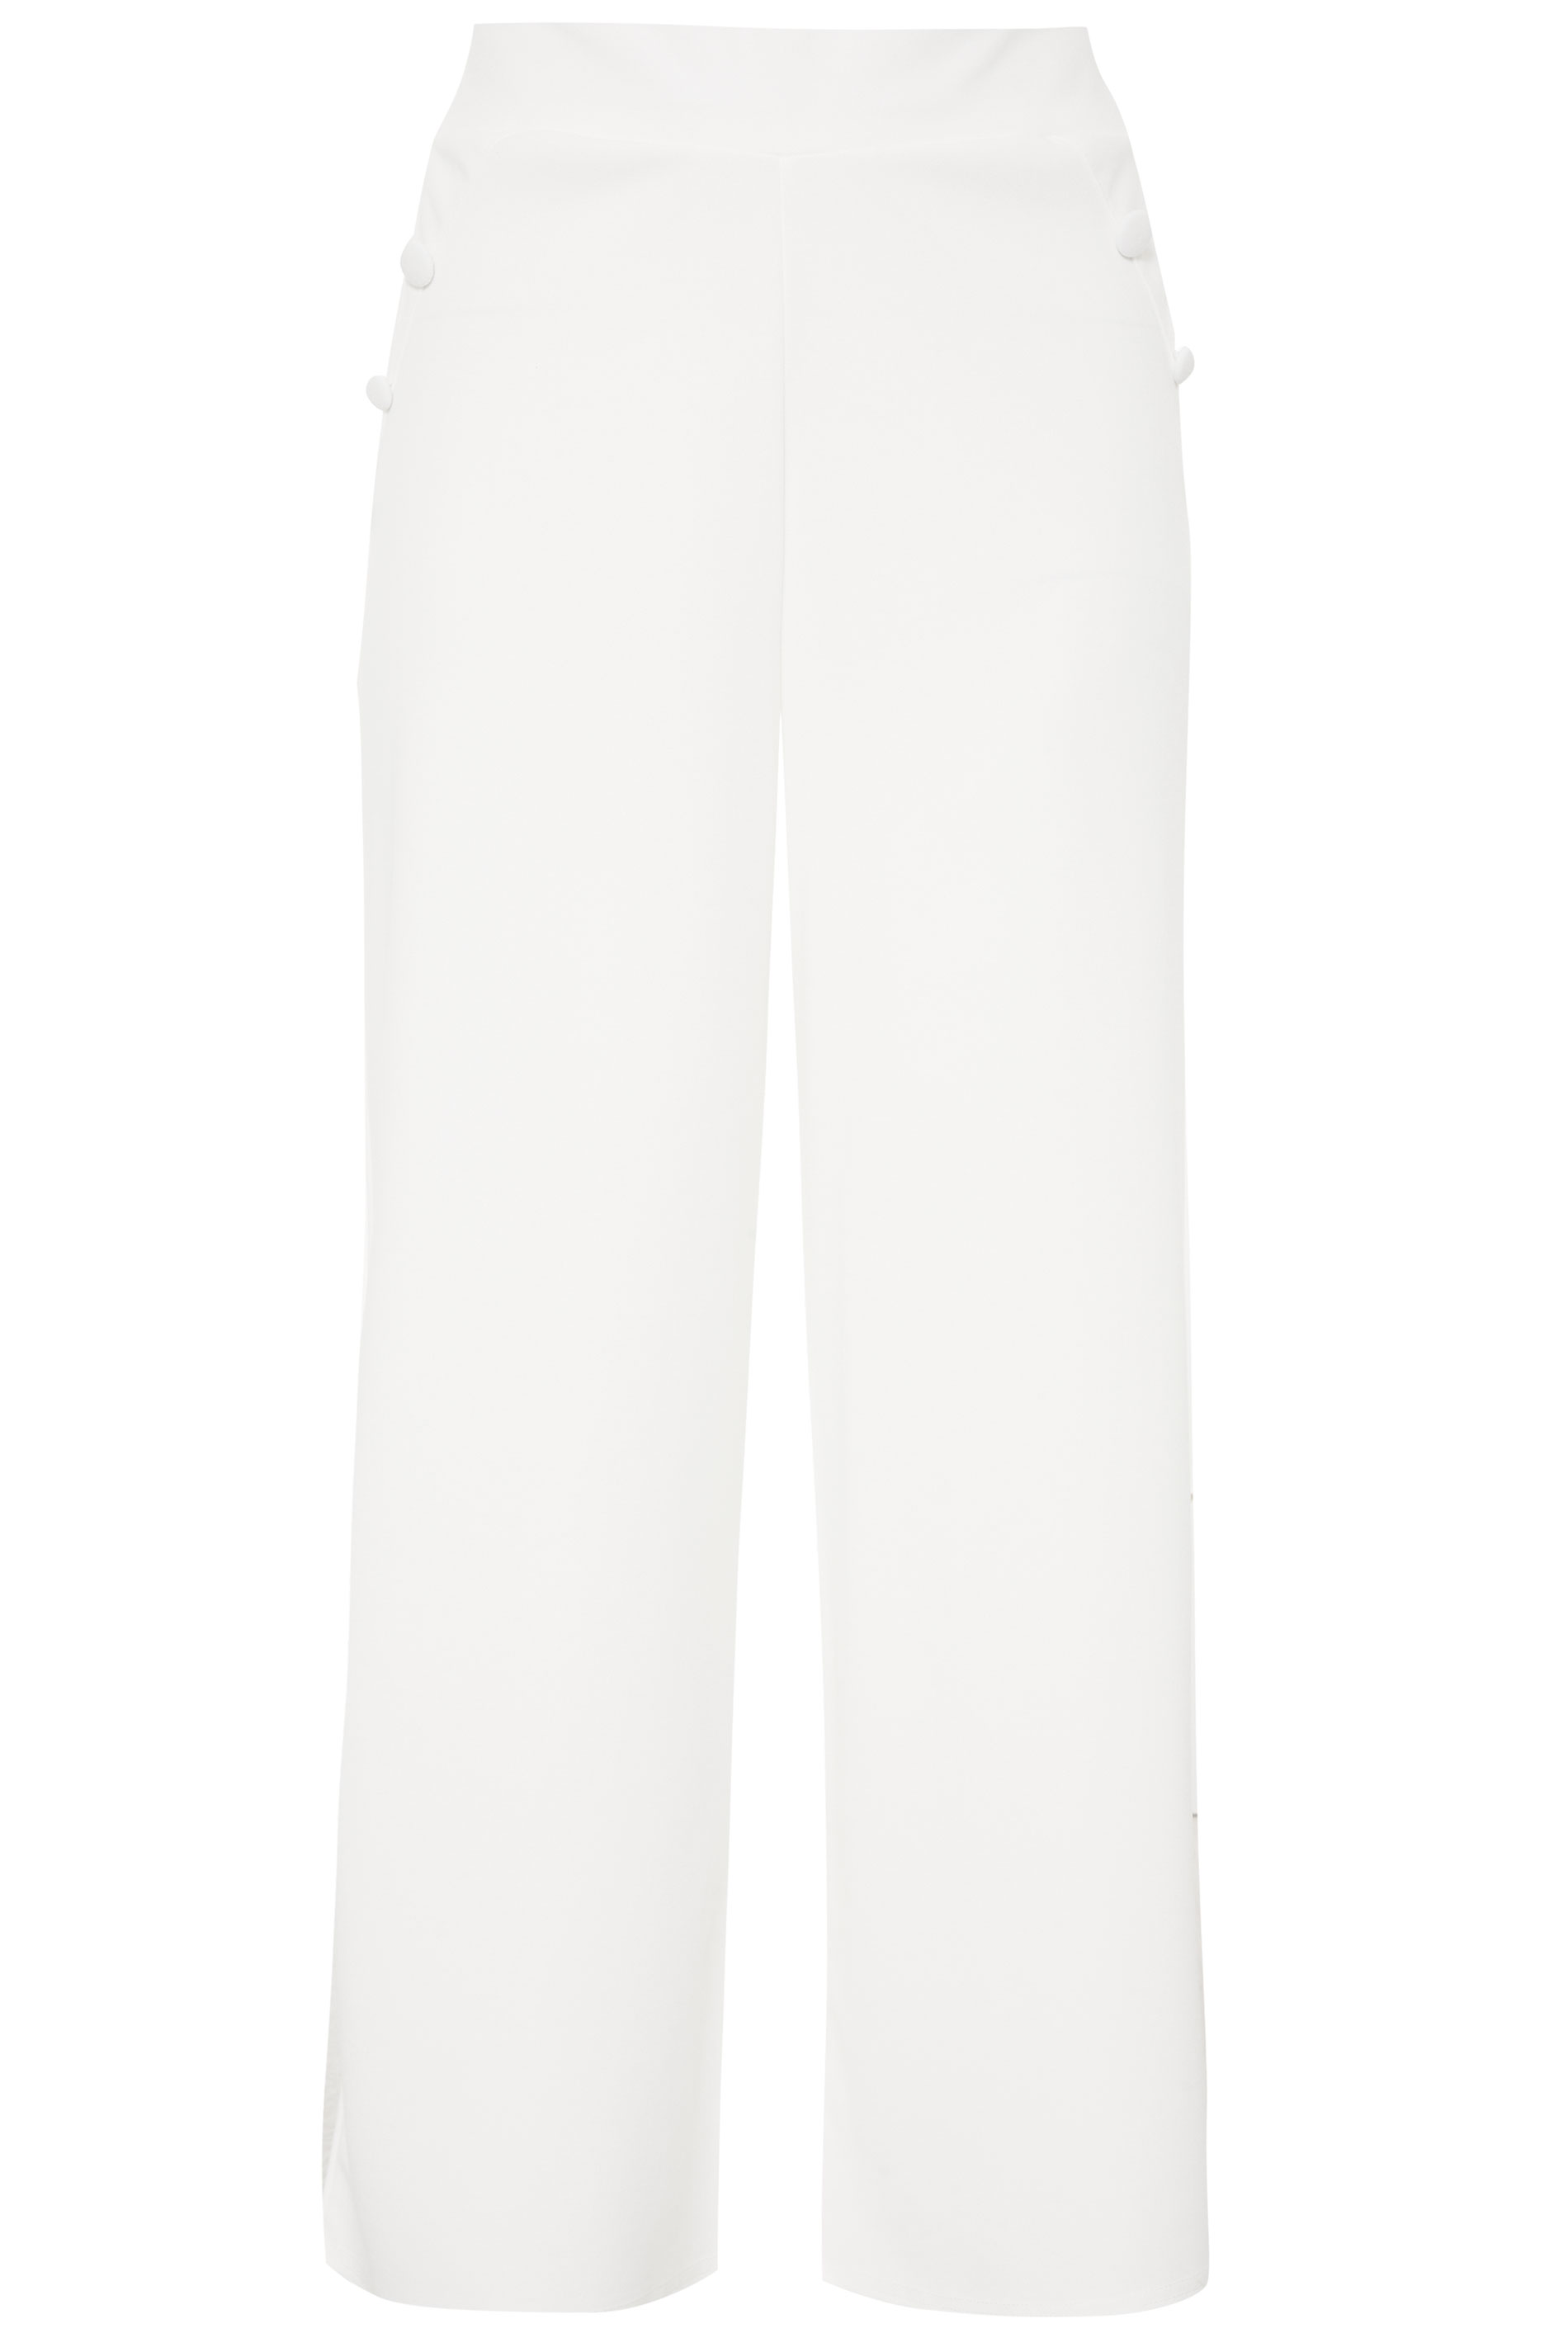 YOURS LONDON White Button Scuba Crepe Wide Leg Trousers | Yours Clothing